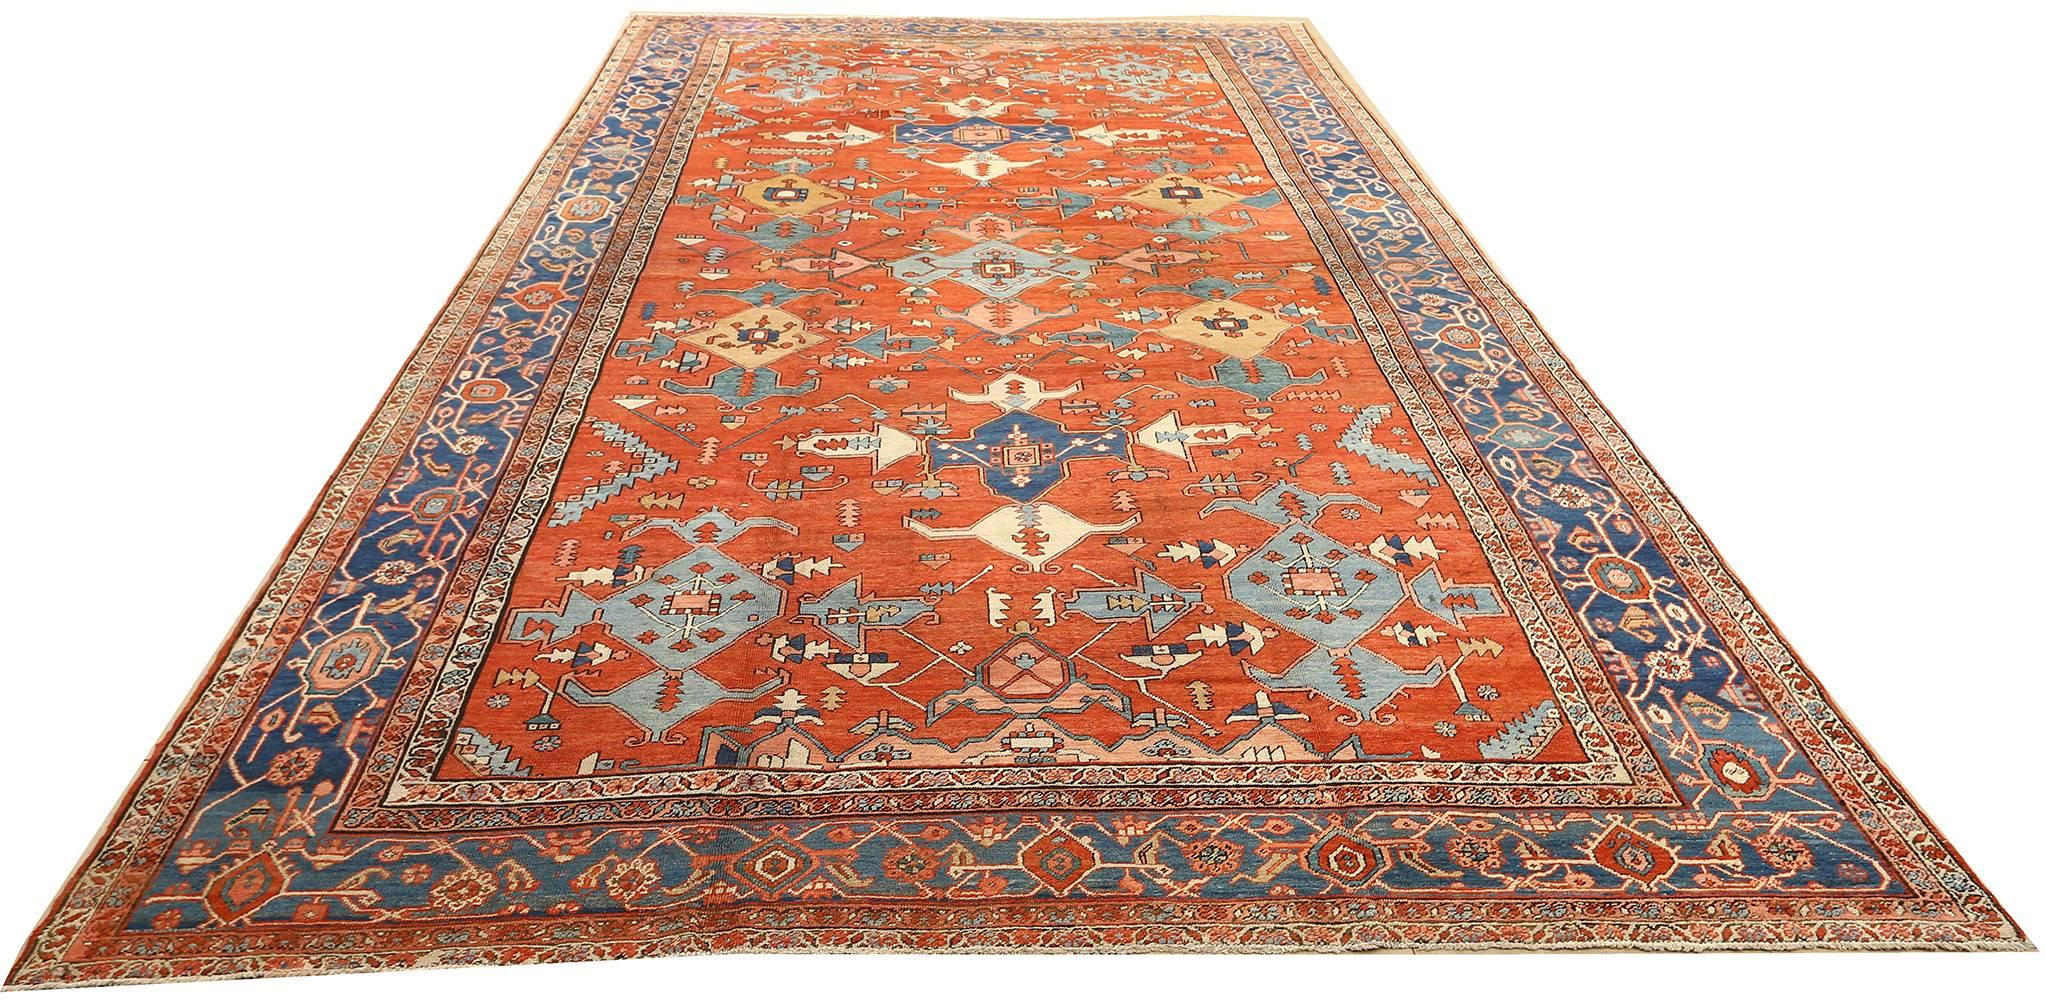 Nazmiyal Collection Antique Serapi Persian Rug. Size: 11 ft 2 in x 19 ft 2 in  2